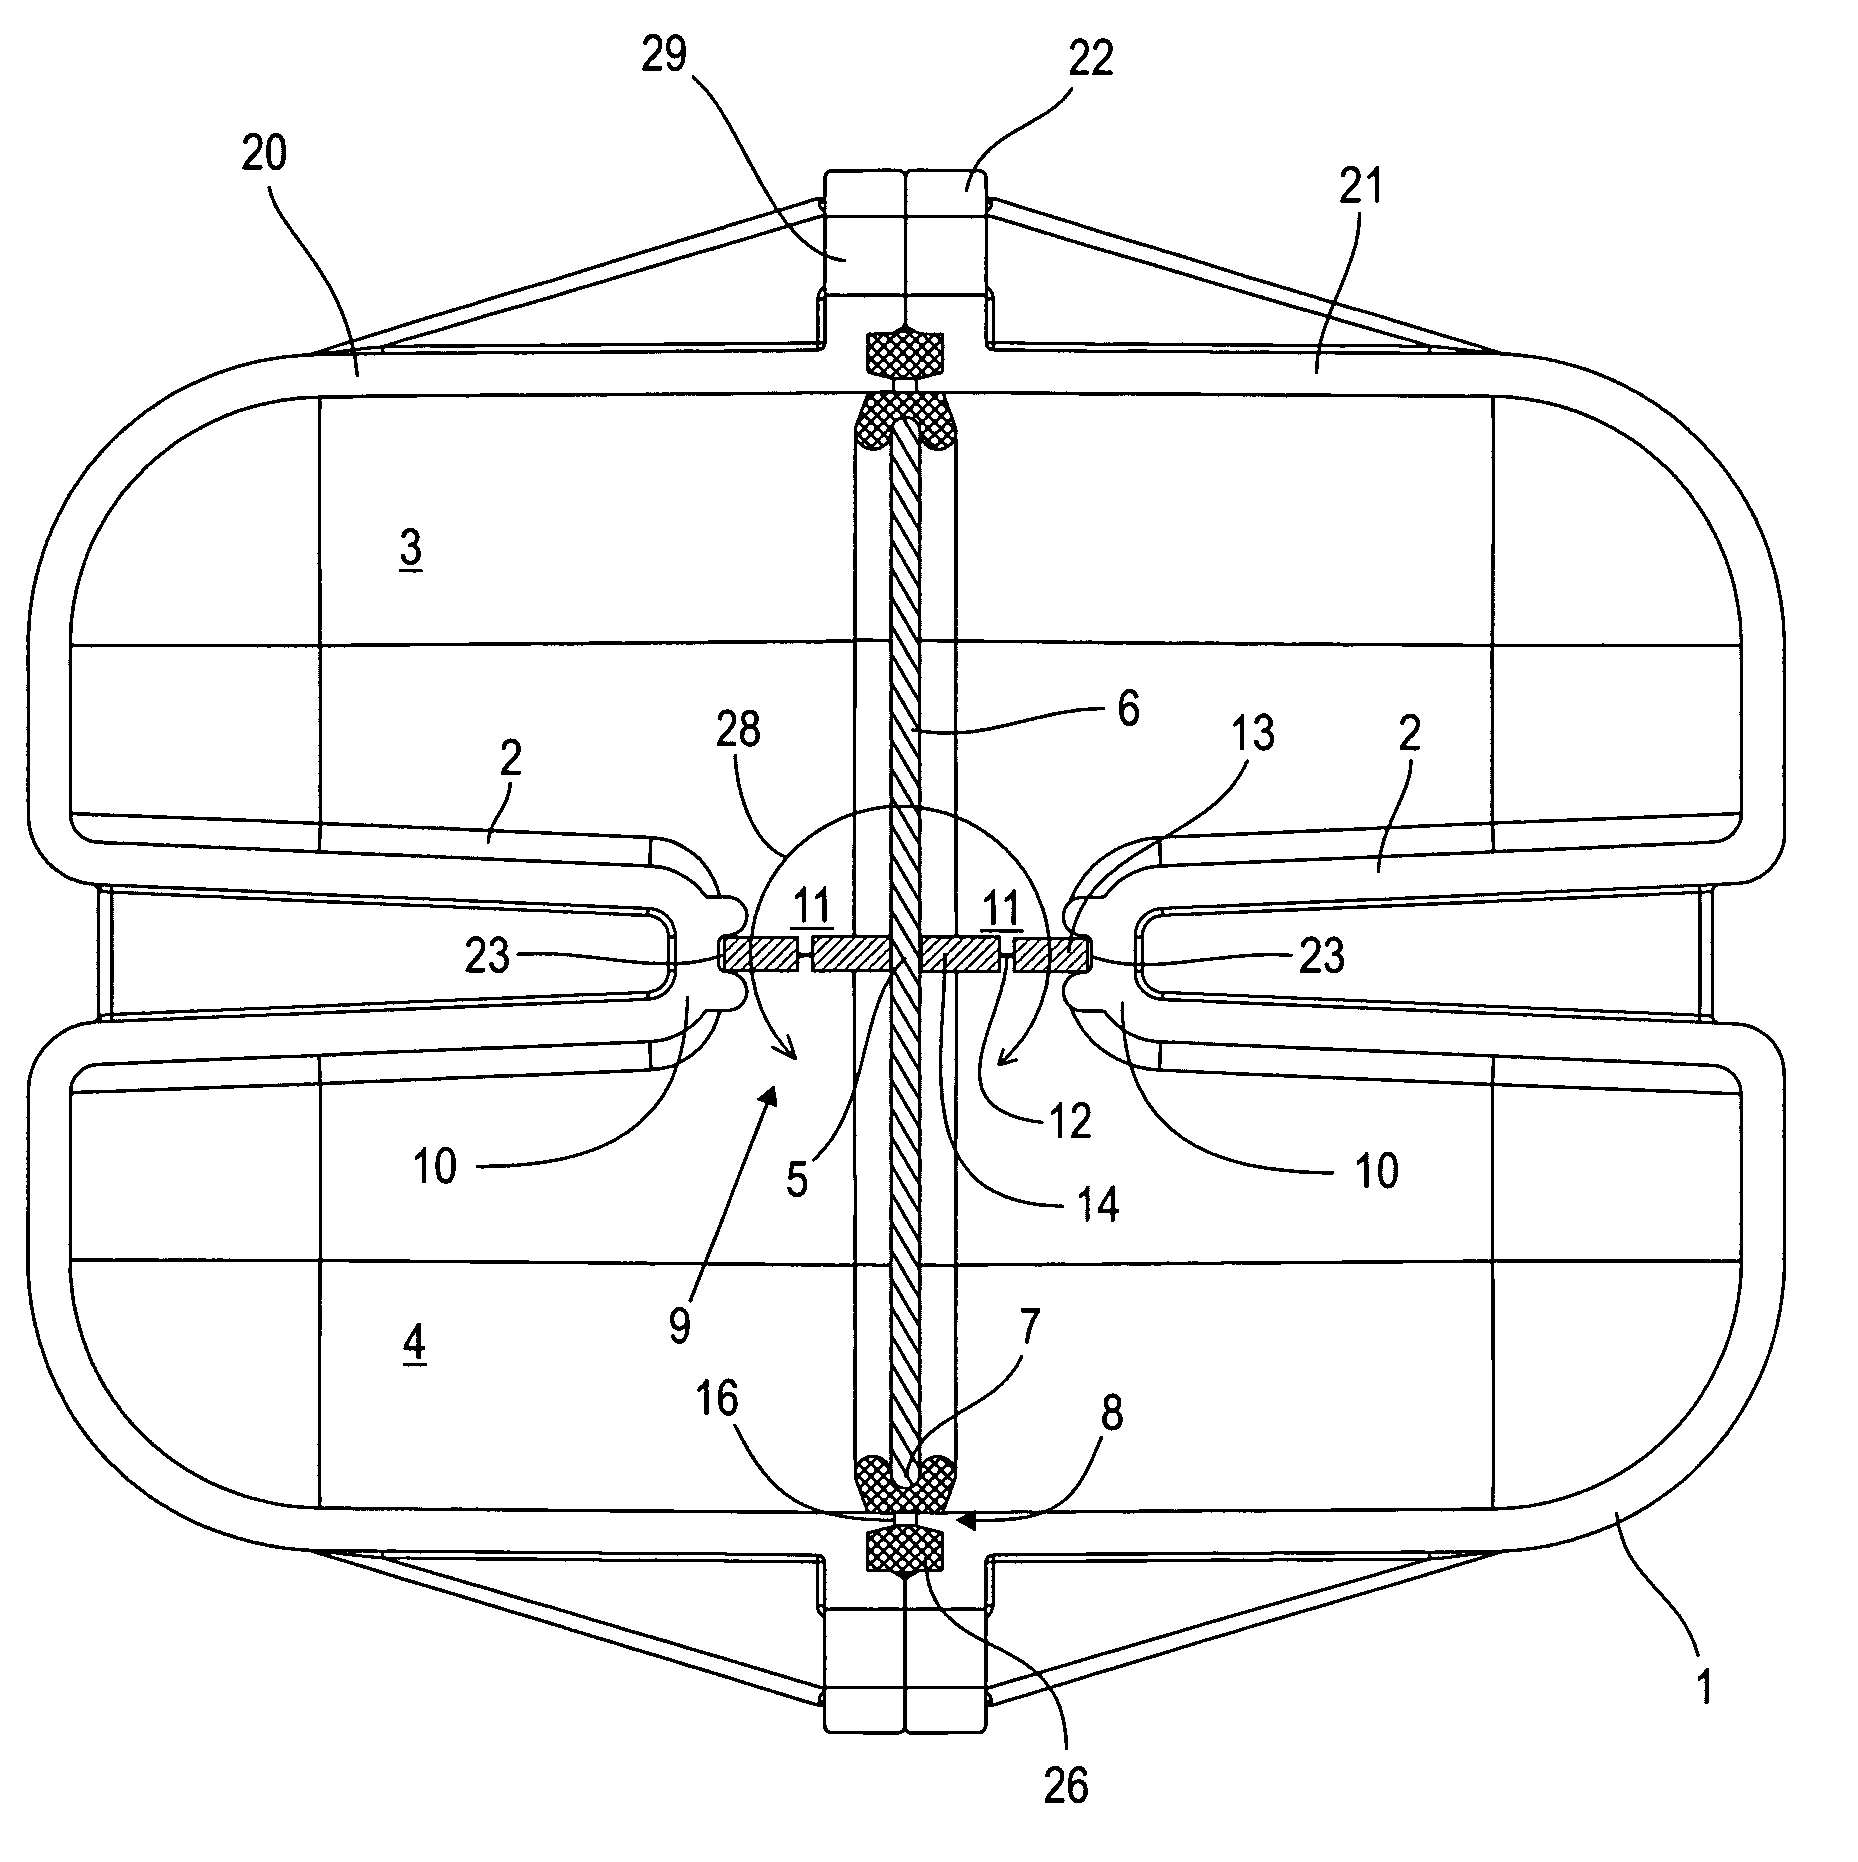 Apparatus for transmitting sound in a motor vehicle